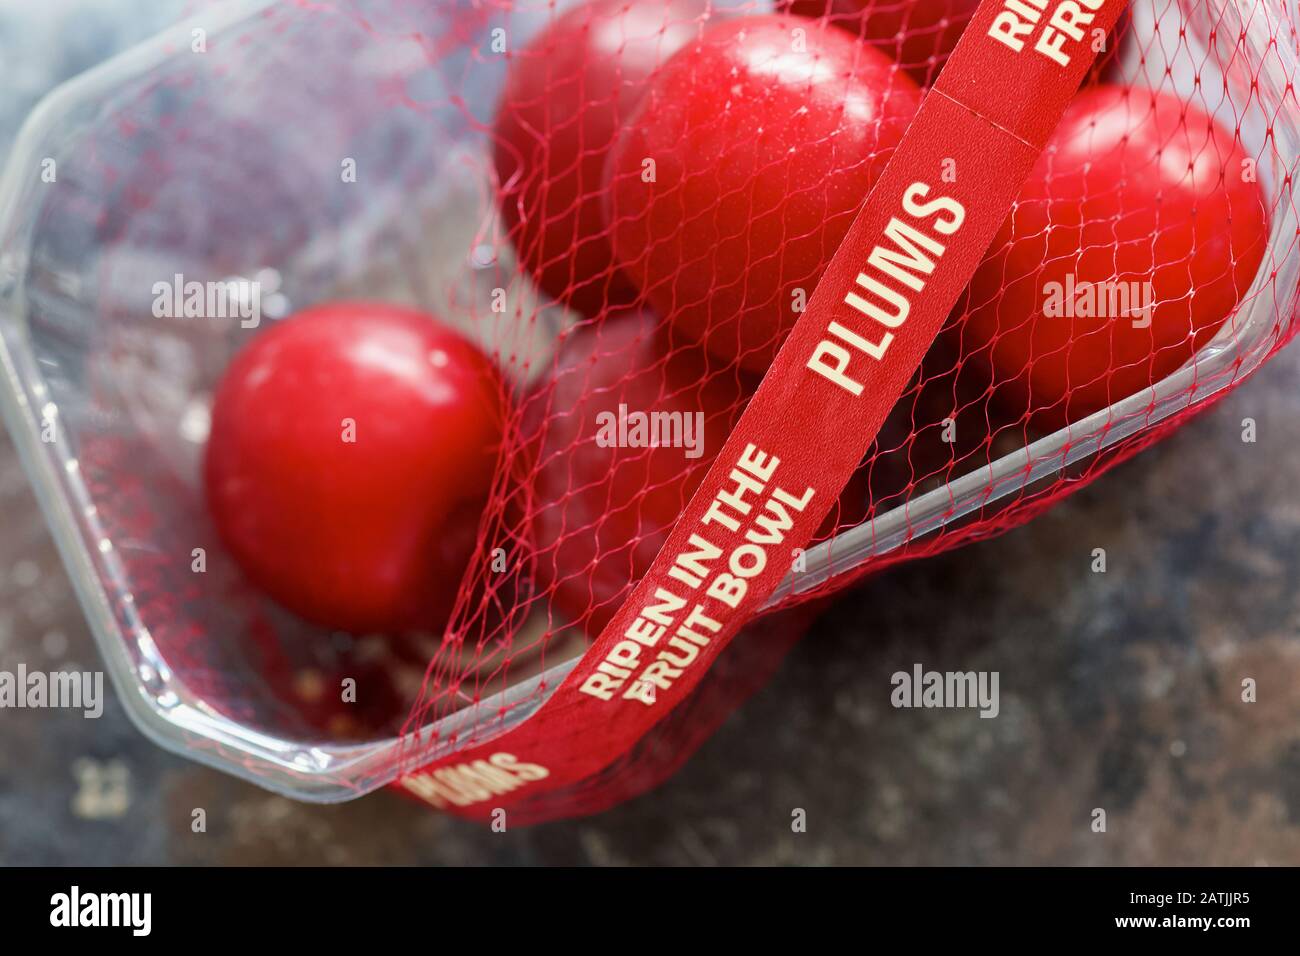 Red Plums Ripen in the Bowl Stock Photo